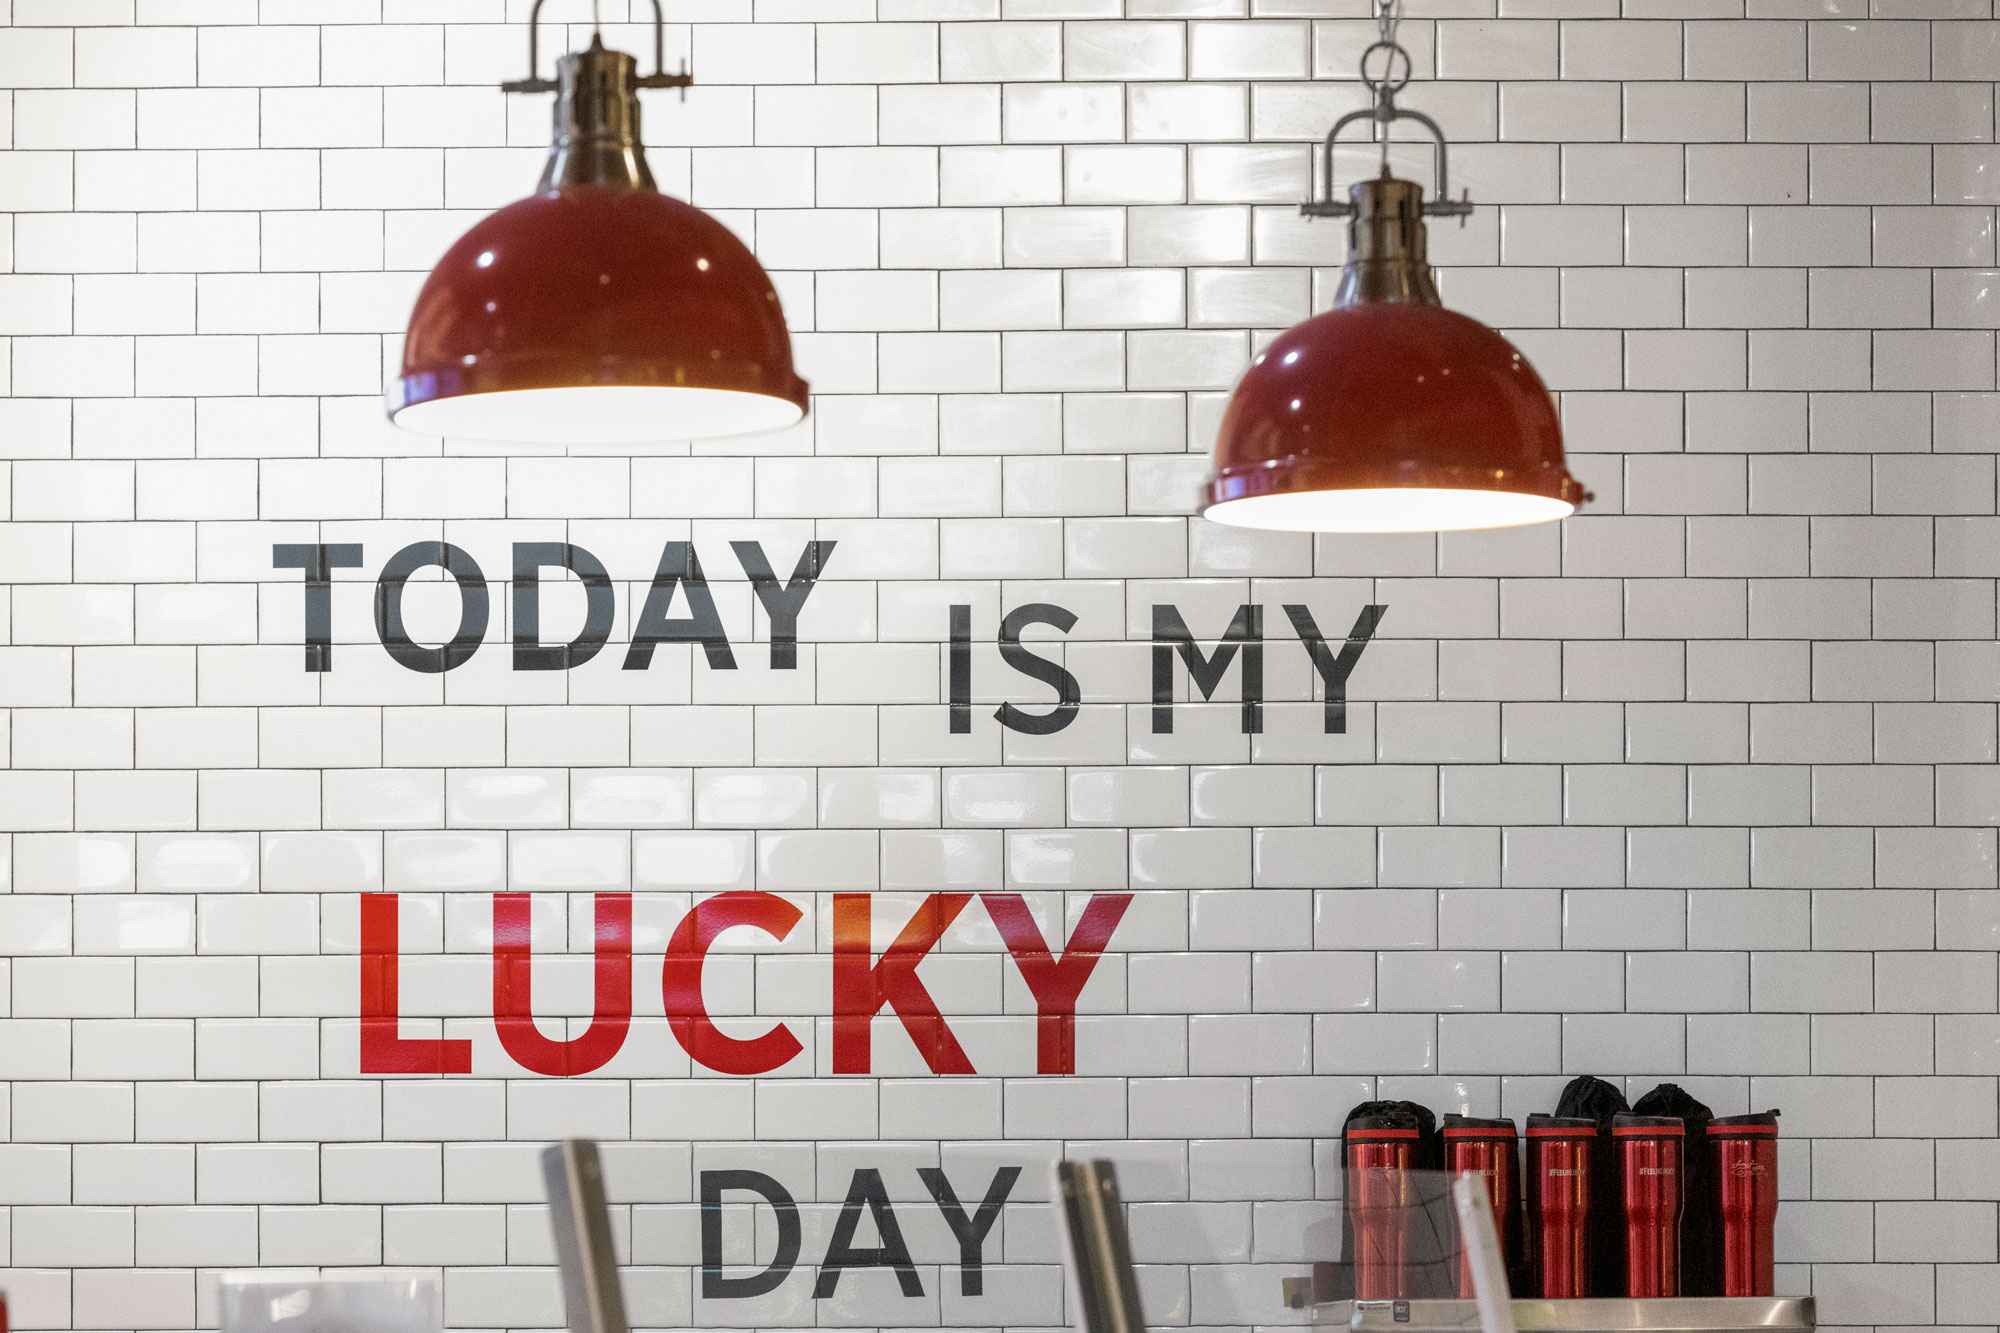 SEA Lucky Louie Fish Shack Today is My Lucky Day Wall Art